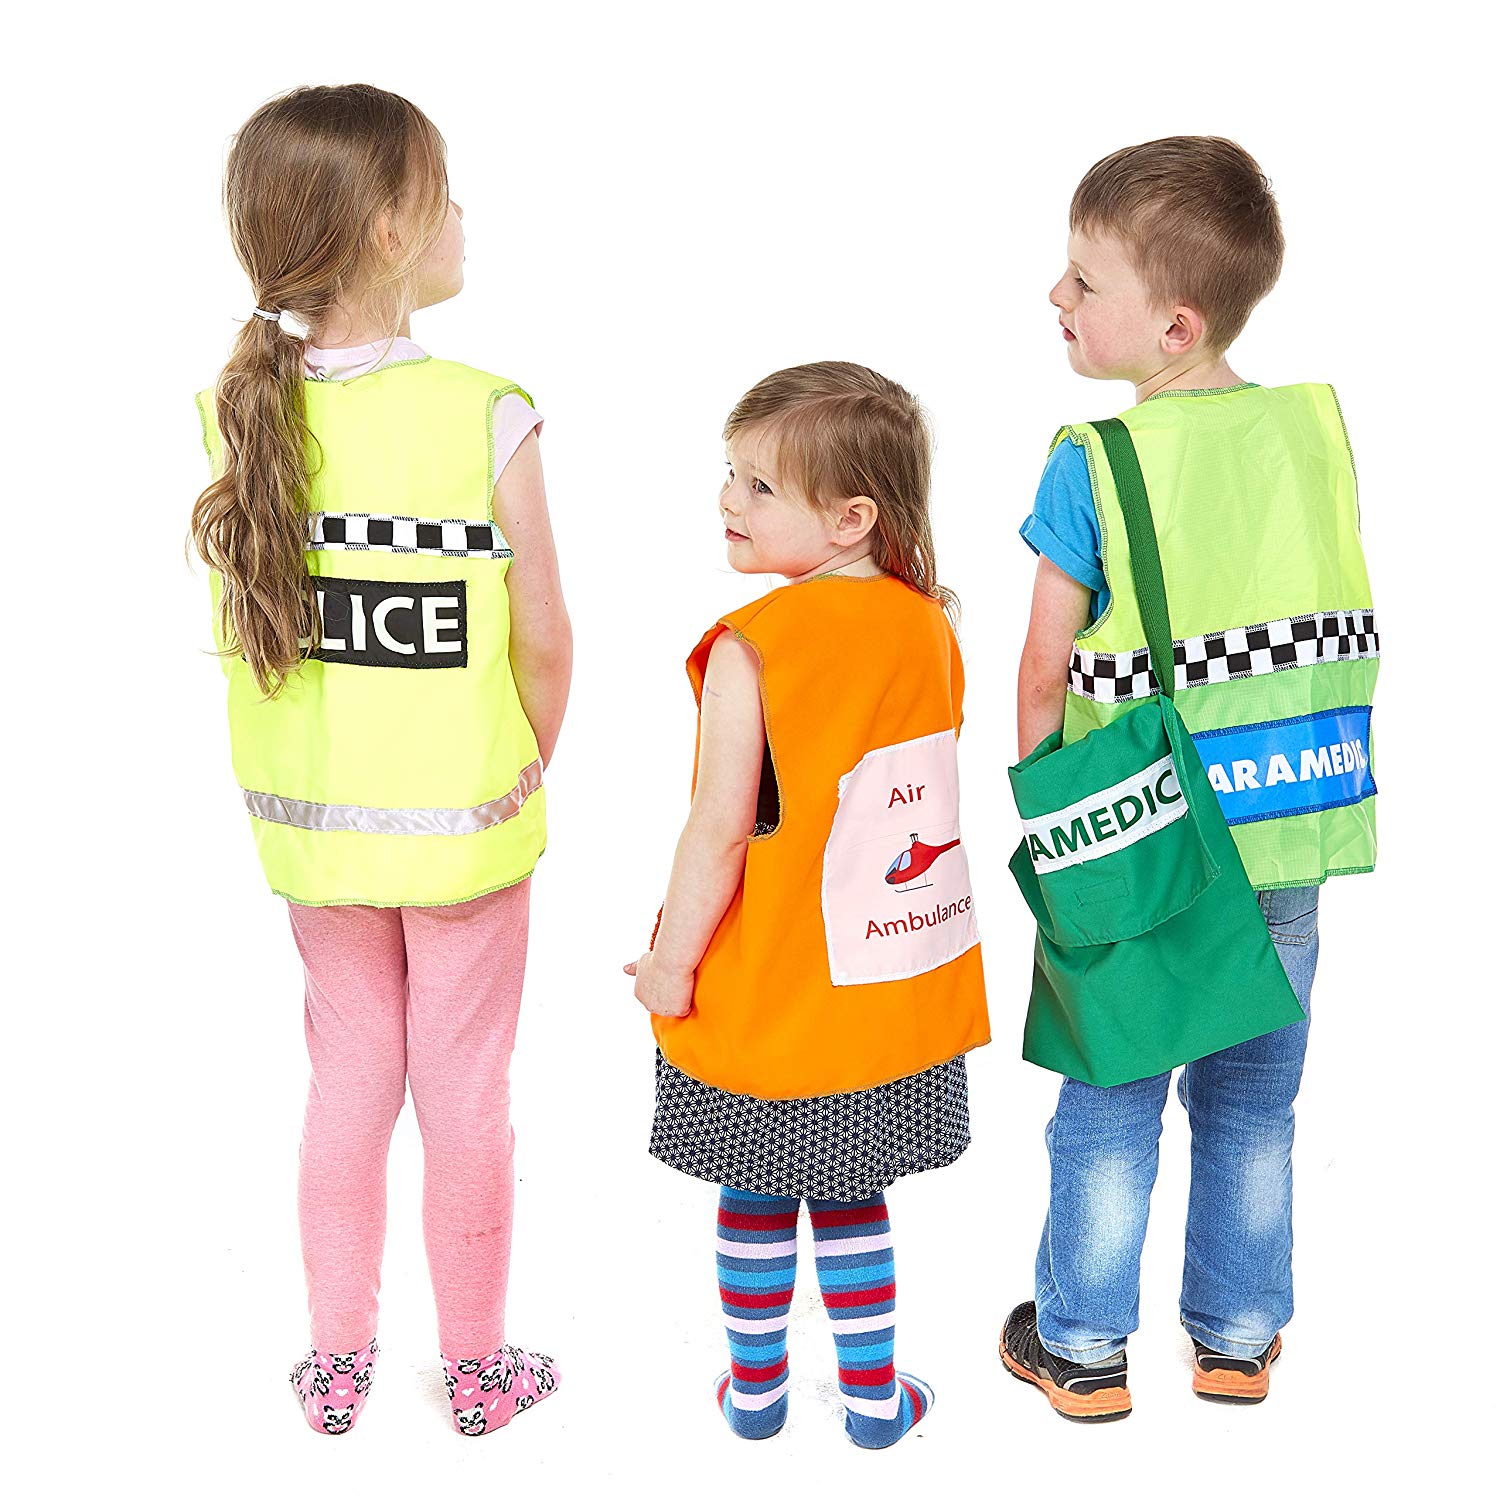 Accident Response Role Play Set, Introducing our Set of Role Play Accident Response Waistcoats, the perfect addition to your dressing up box! This set includes four dressing up waistcoats, specifically designed for emergency services role play.With two paramedic waistcoats, a police waistcoat, an air ambulance waistcoat, and a first aid kit bag, this set offers endless possibilities for imaginative play. Whether your little one dreams of being a hero in the medical field, a brave police officer, or a fearle